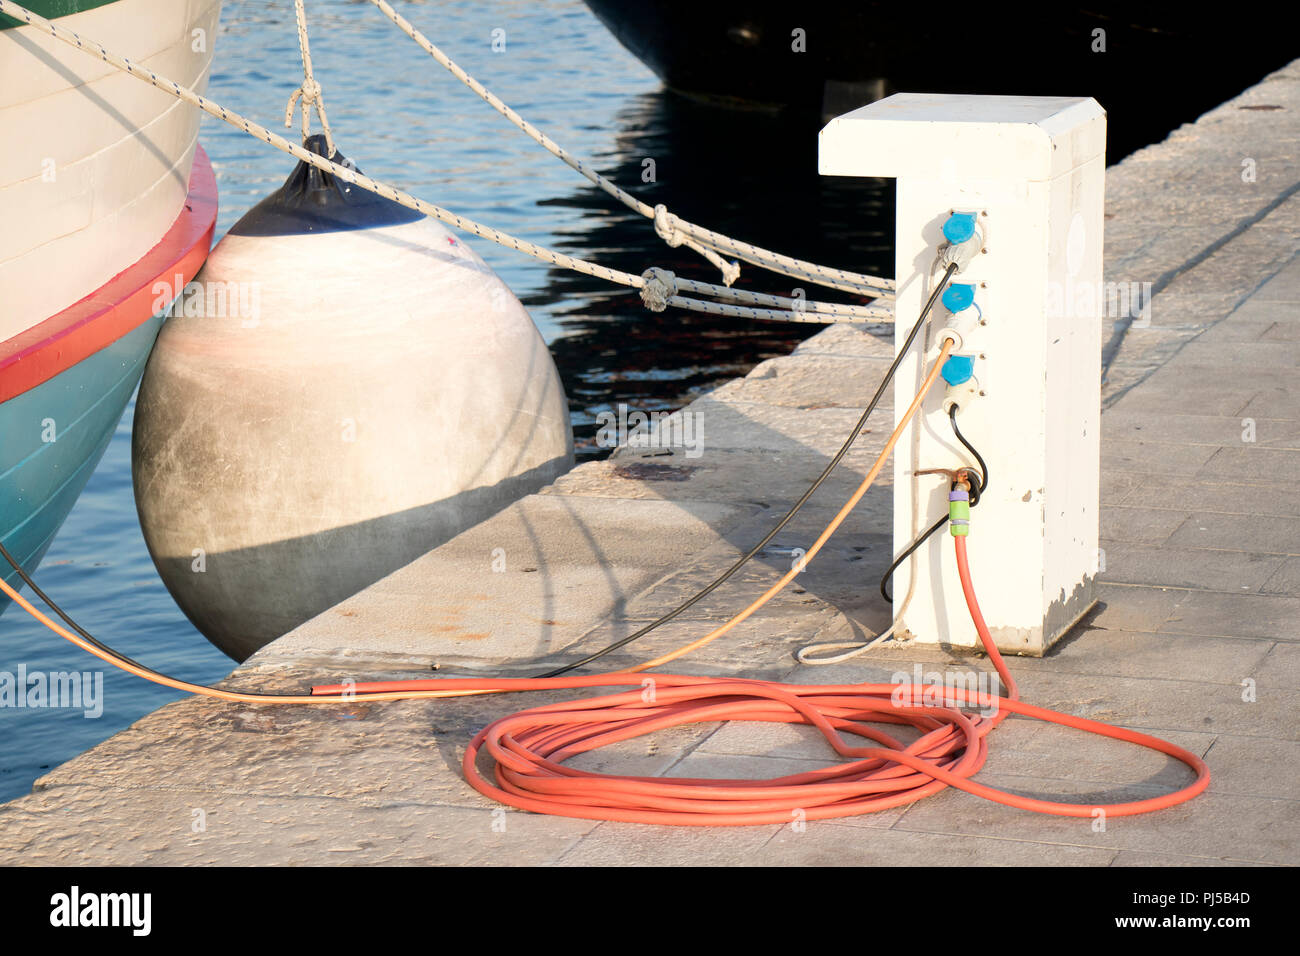 Pier with electrical and water supply pedestal with hose and cable , bitt and a rope on the dock fastened to a vintage boat with fender Stock Photo